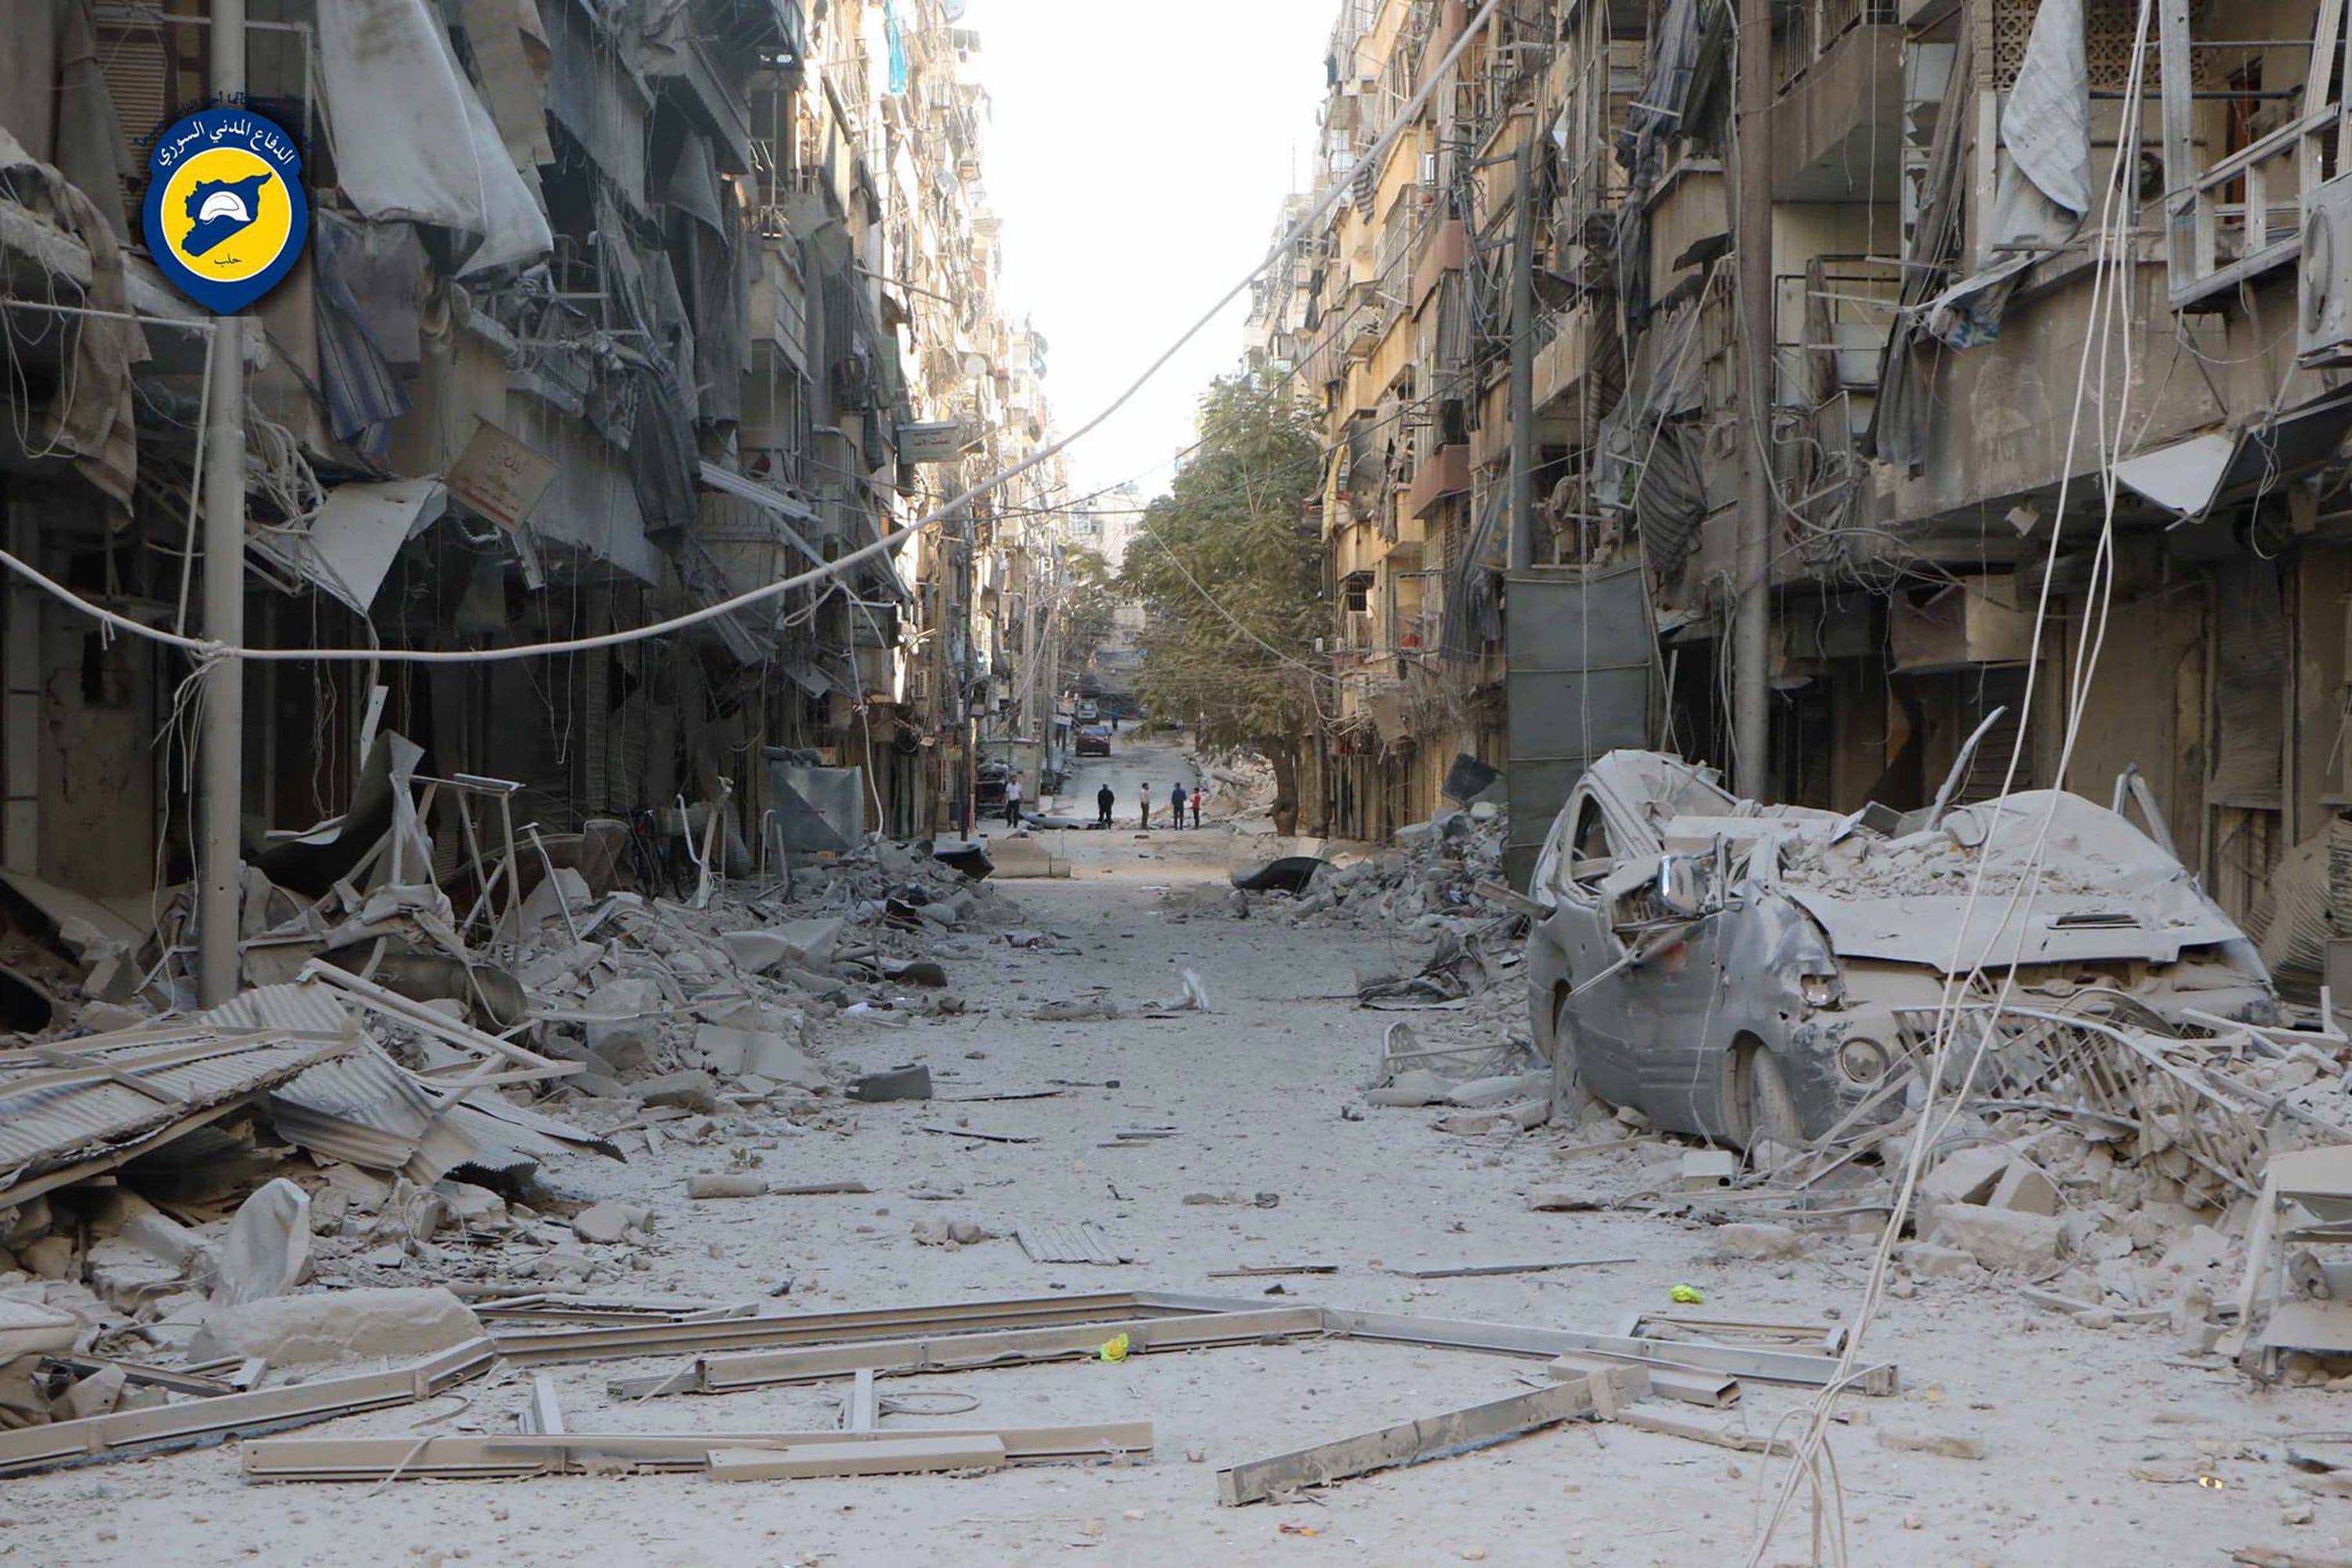 In this photo provided by the Syrian Civil Defense group known as the White Helmets, shows heavily damaged buildings after airstrikes hit in Aleppo, Syria, Saturday, Sept. 24, 2016. Syrian government forces captured a rebel-held area on the edge of Aleppo on Saturday, tightening their siege on opposition-held neighborhoods in the northern city as an ongoing wave of airstrikes destroyed more buildings.